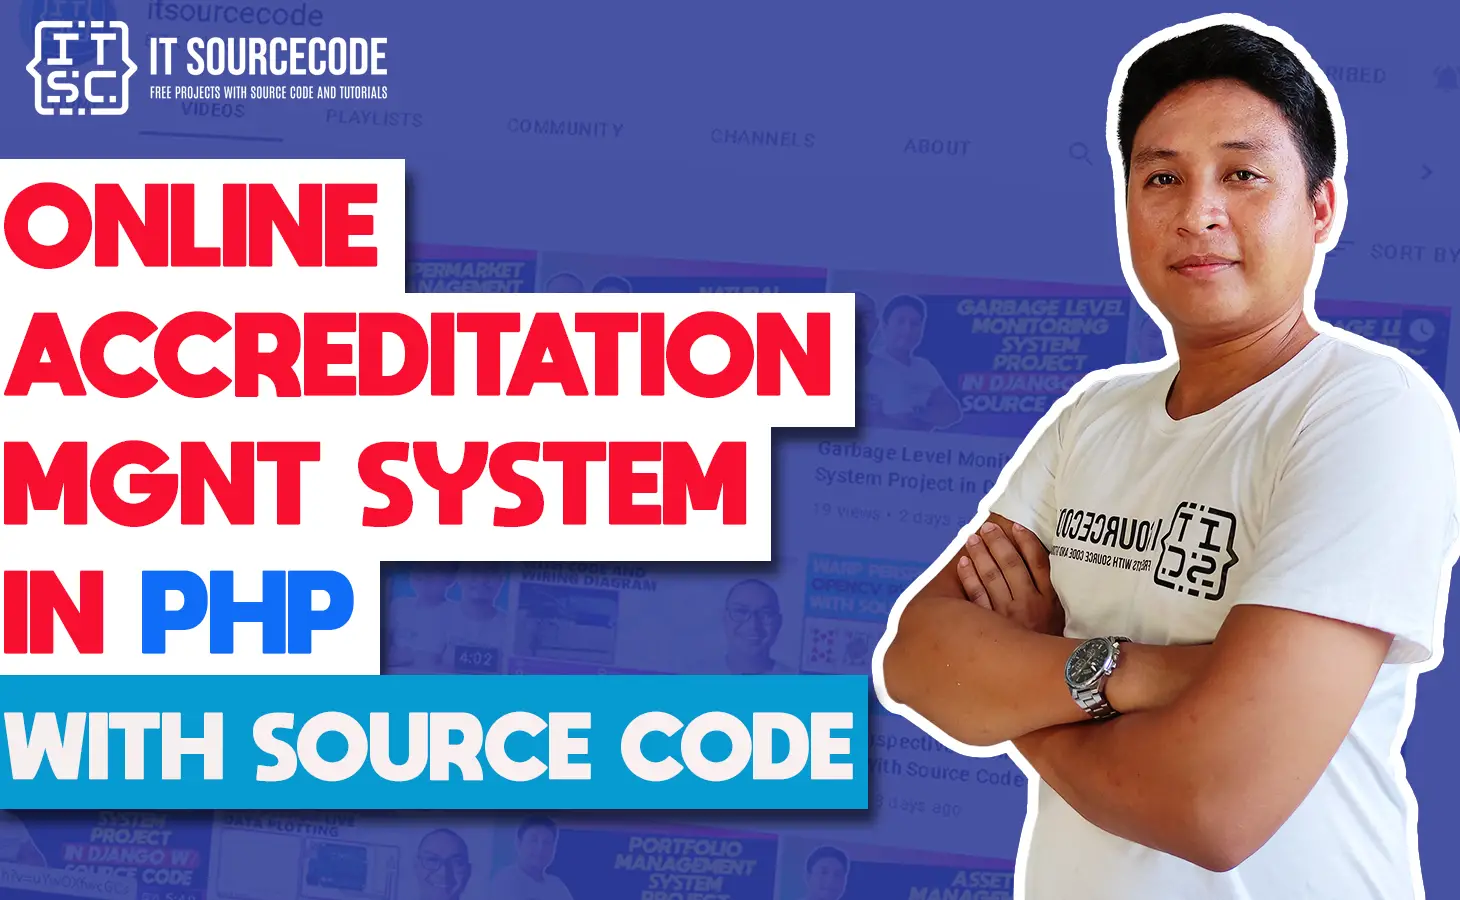 Online Accreditation Management System in PHP with Source Code